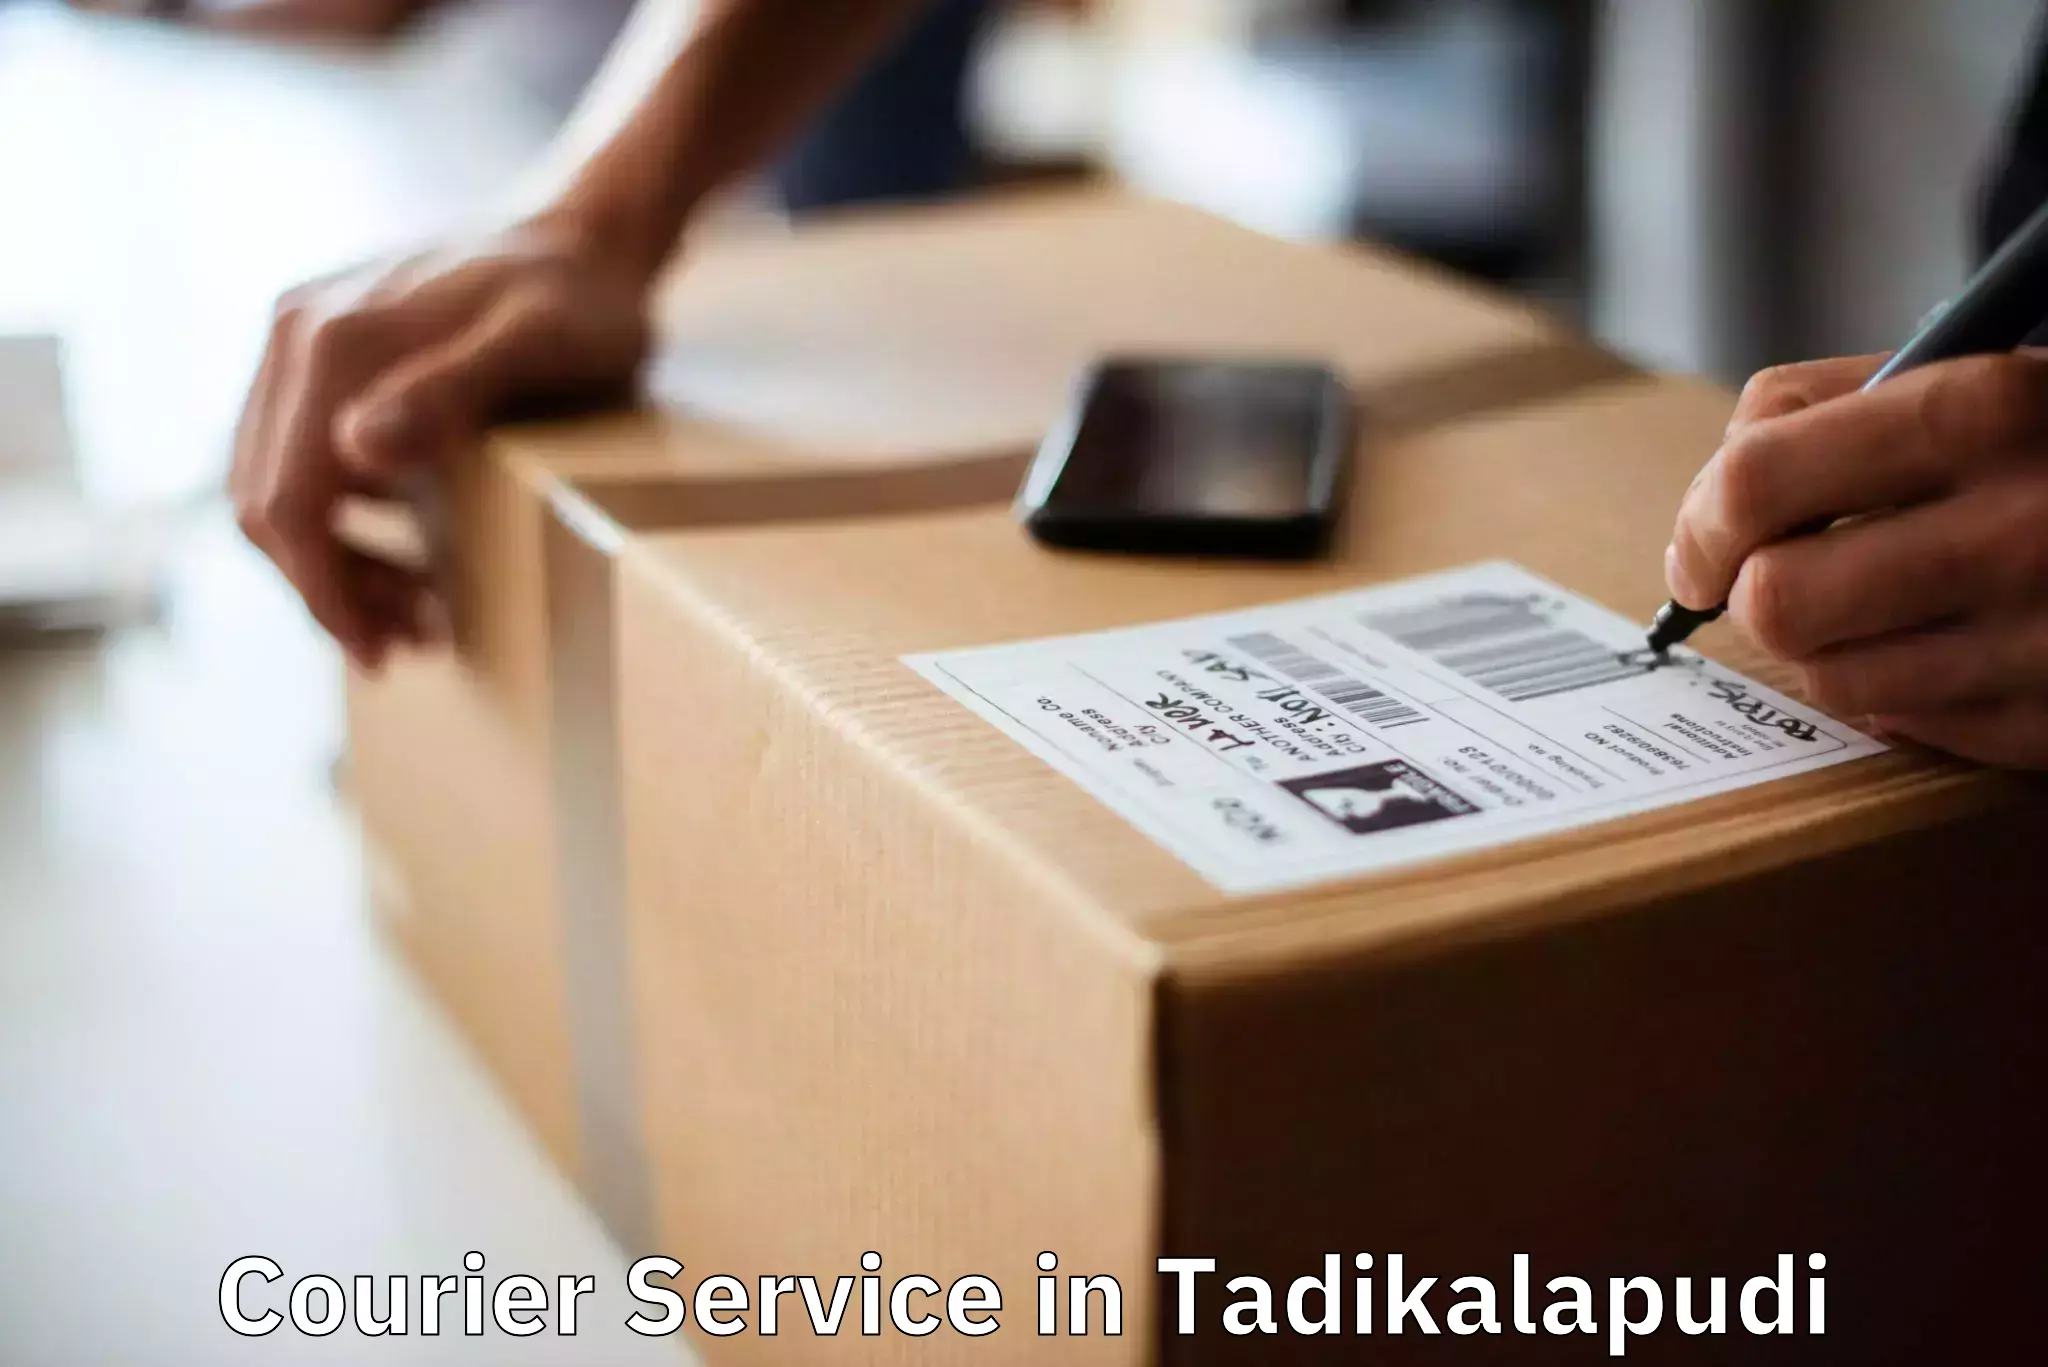 Medical delivery services in Tadikalapudi